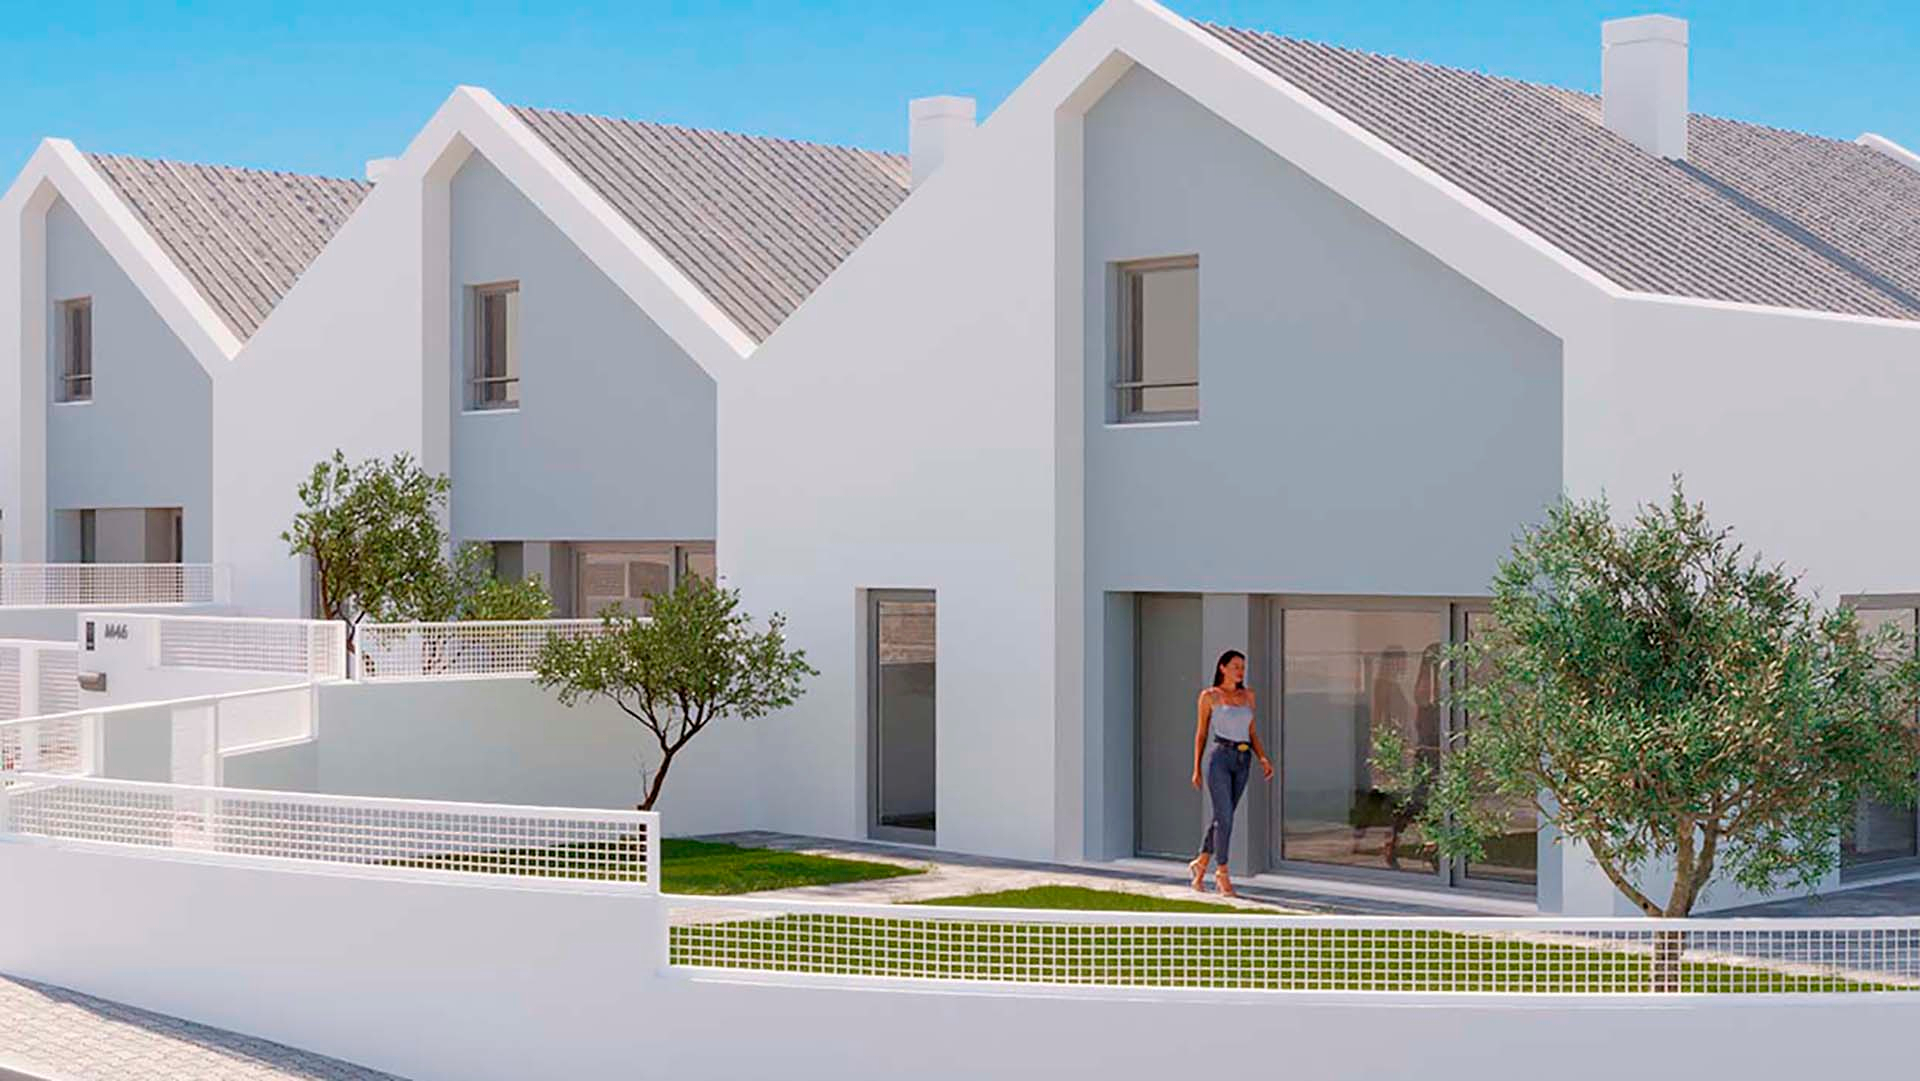 Modern 3 + 1 Bedroom Linked Villas by the Riverside - Ferragudo | VM2025 Newly constructed linked villas with riverfront location. Turnkey property or new home for young family